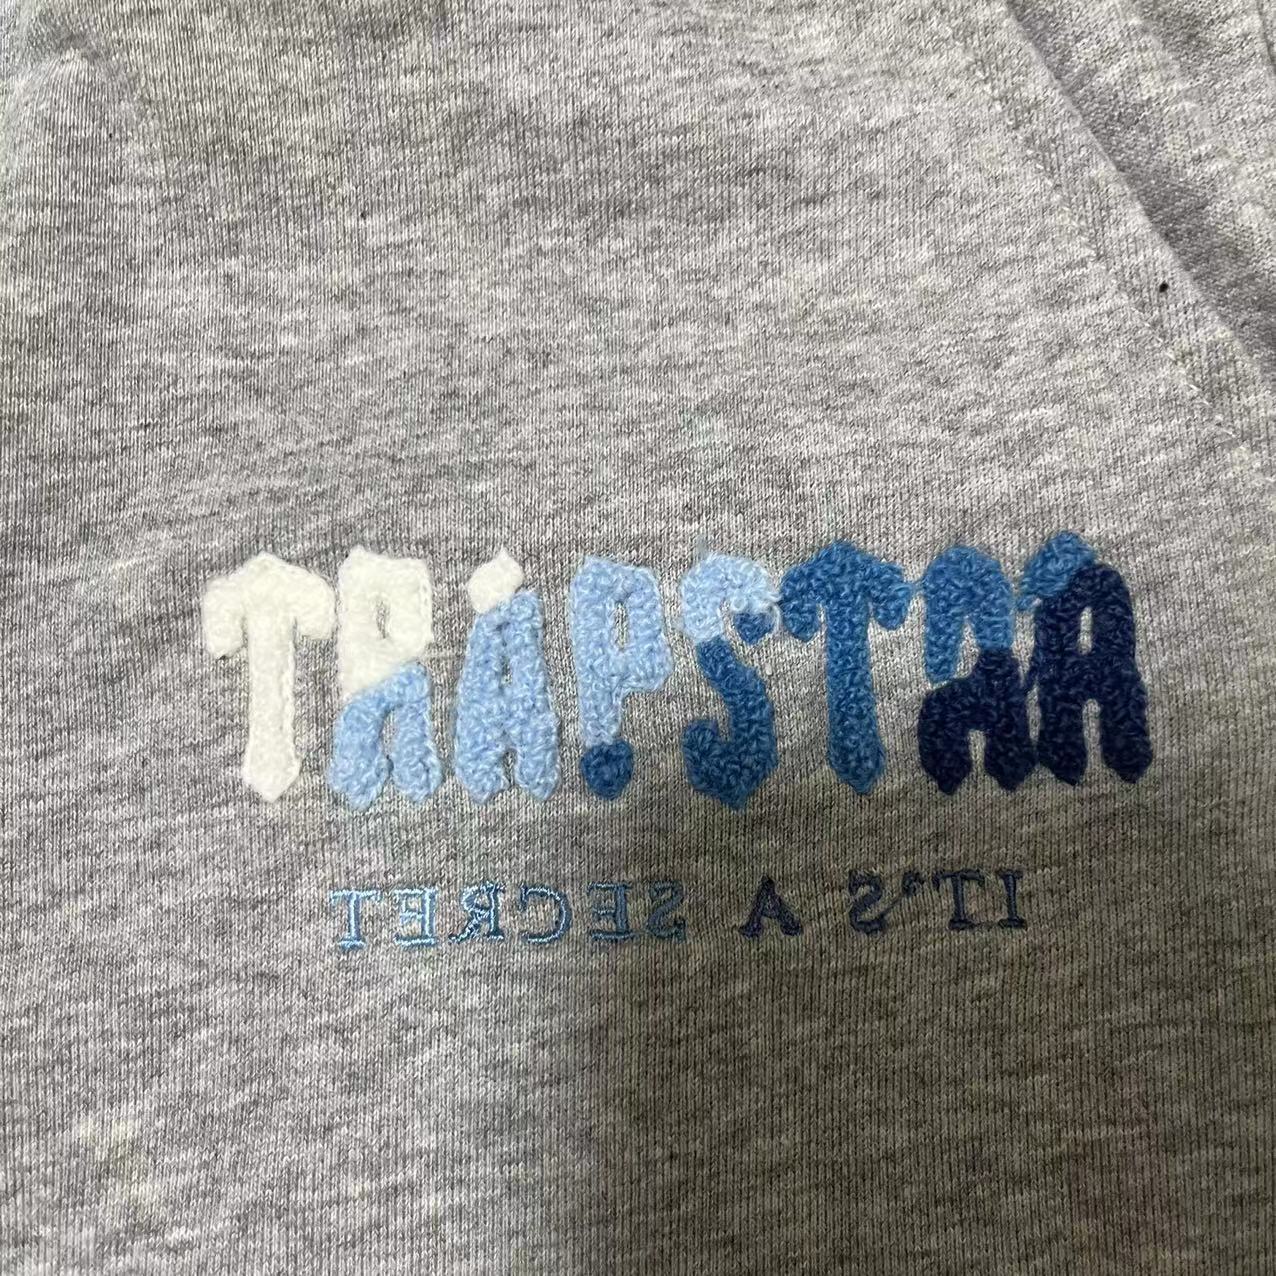 TRAPSTAR TEE T SHIRT LETTER EMBROIDERY (GRAY WHITE BLUE)